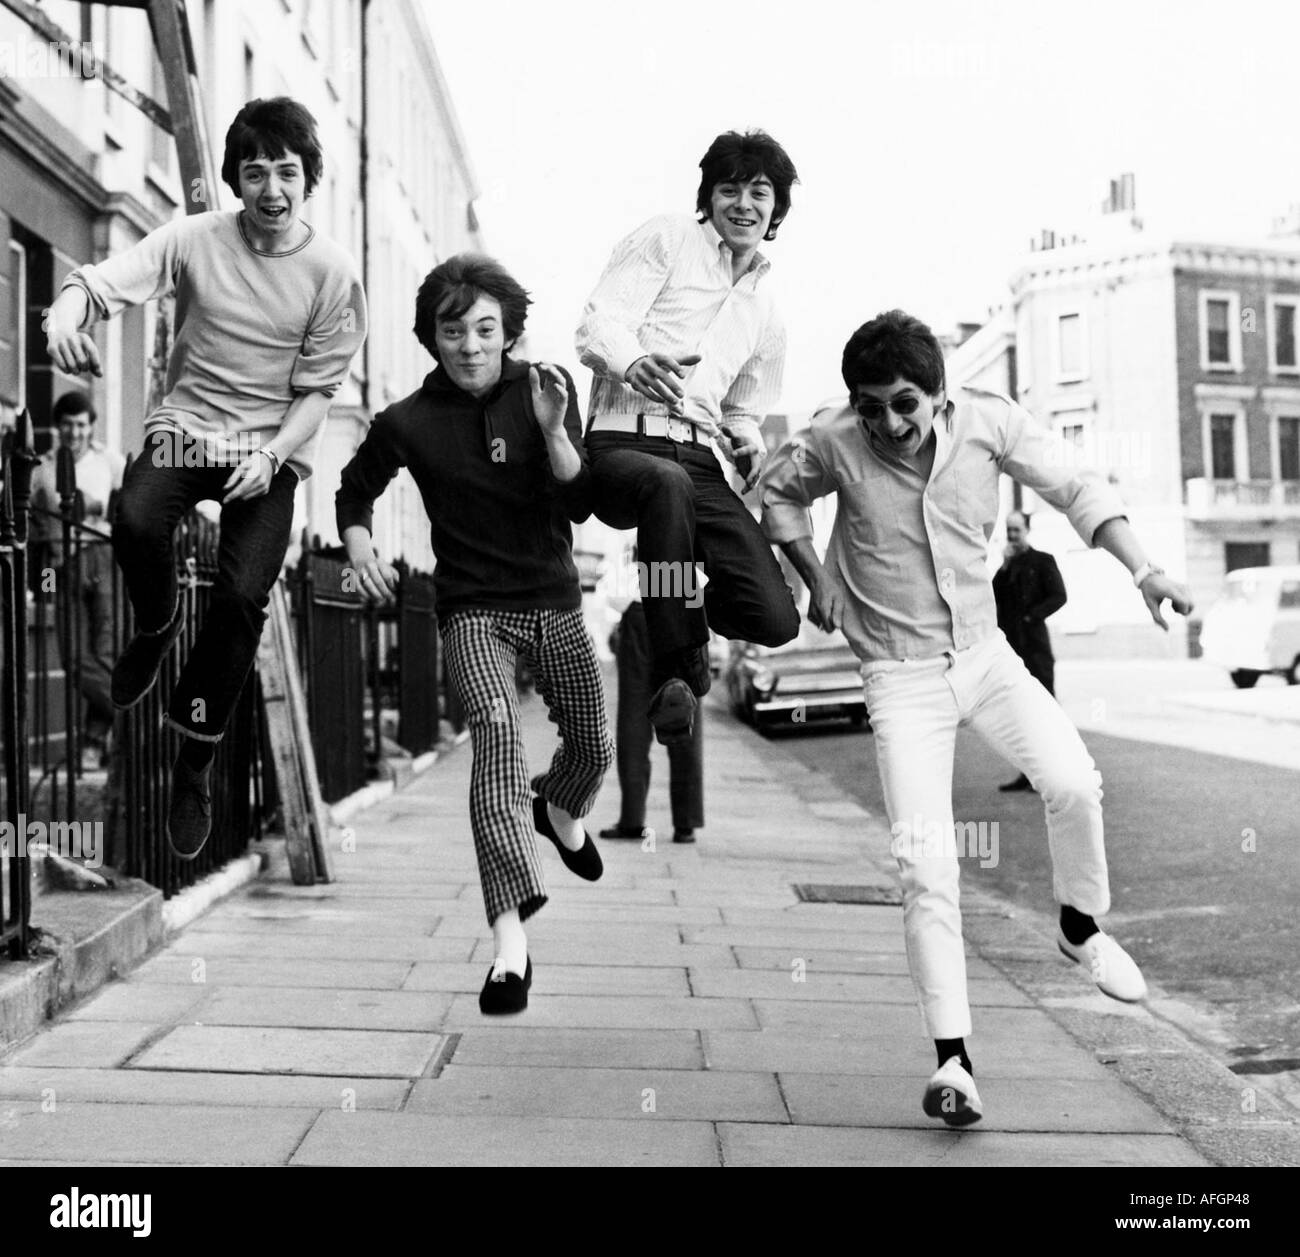 SMALL FACES UK pop group hre in 1966 Photo Tony Gale Stock Photo